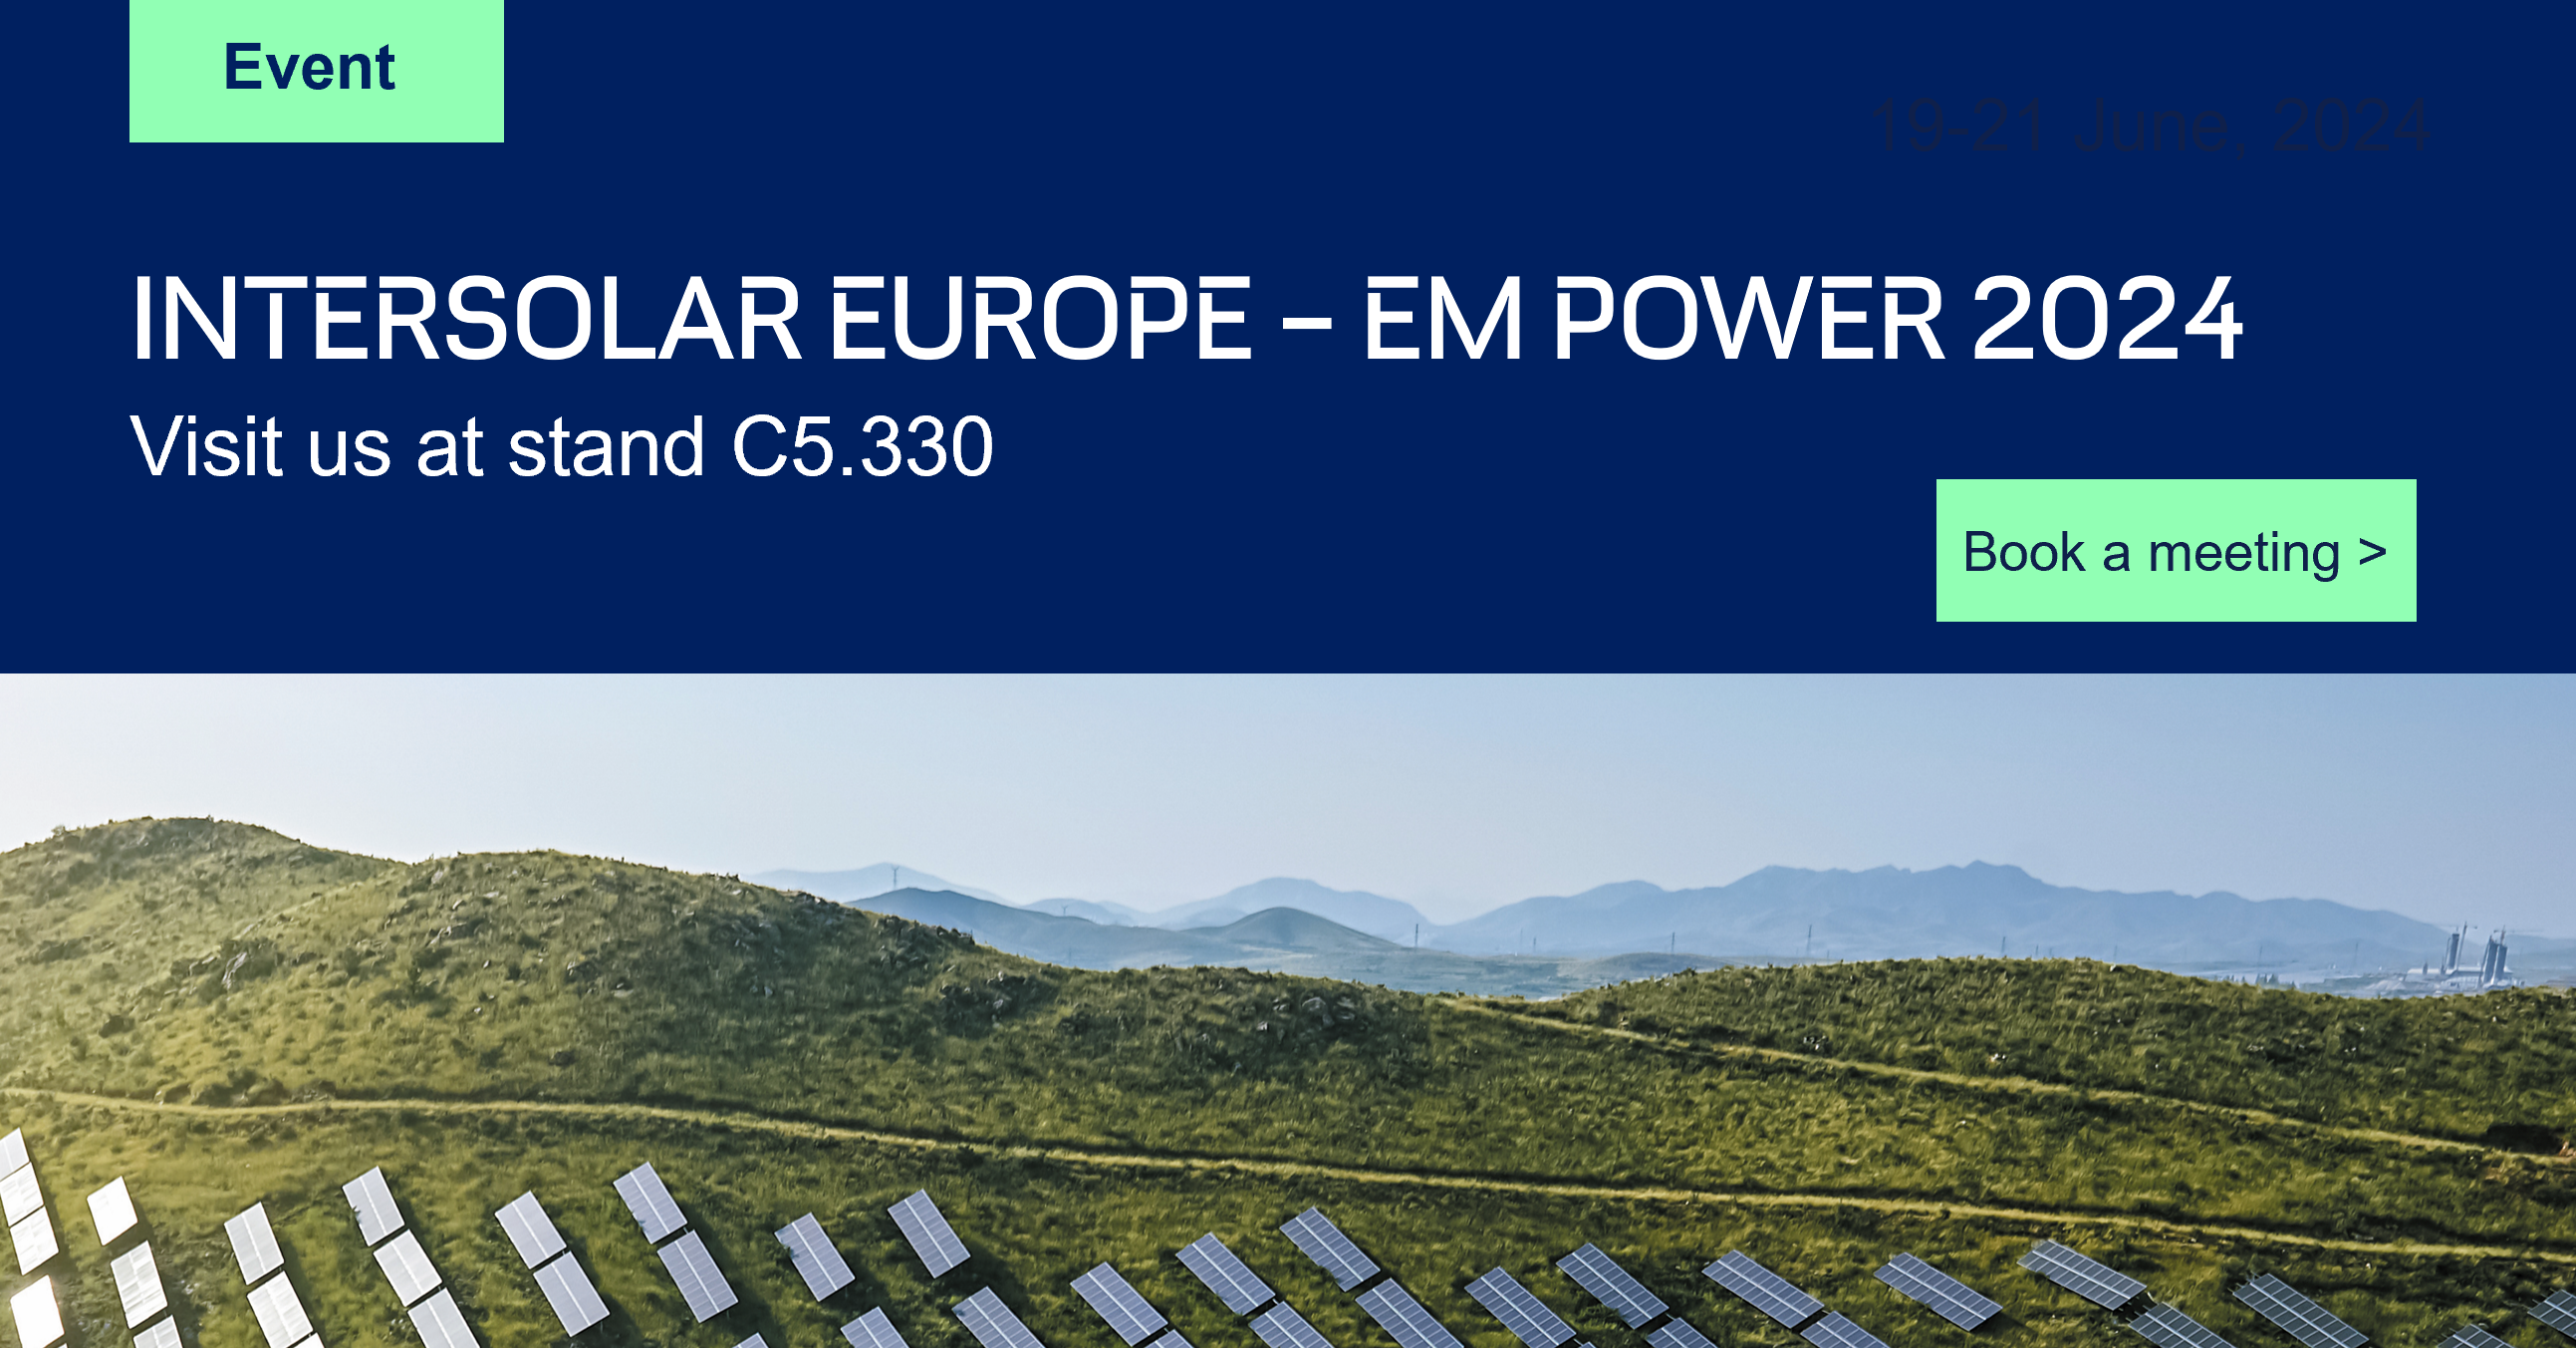 GreenPowerMonitor will attend Intersolar and EM Power in Munich, Germany on 18-20 June 2024.